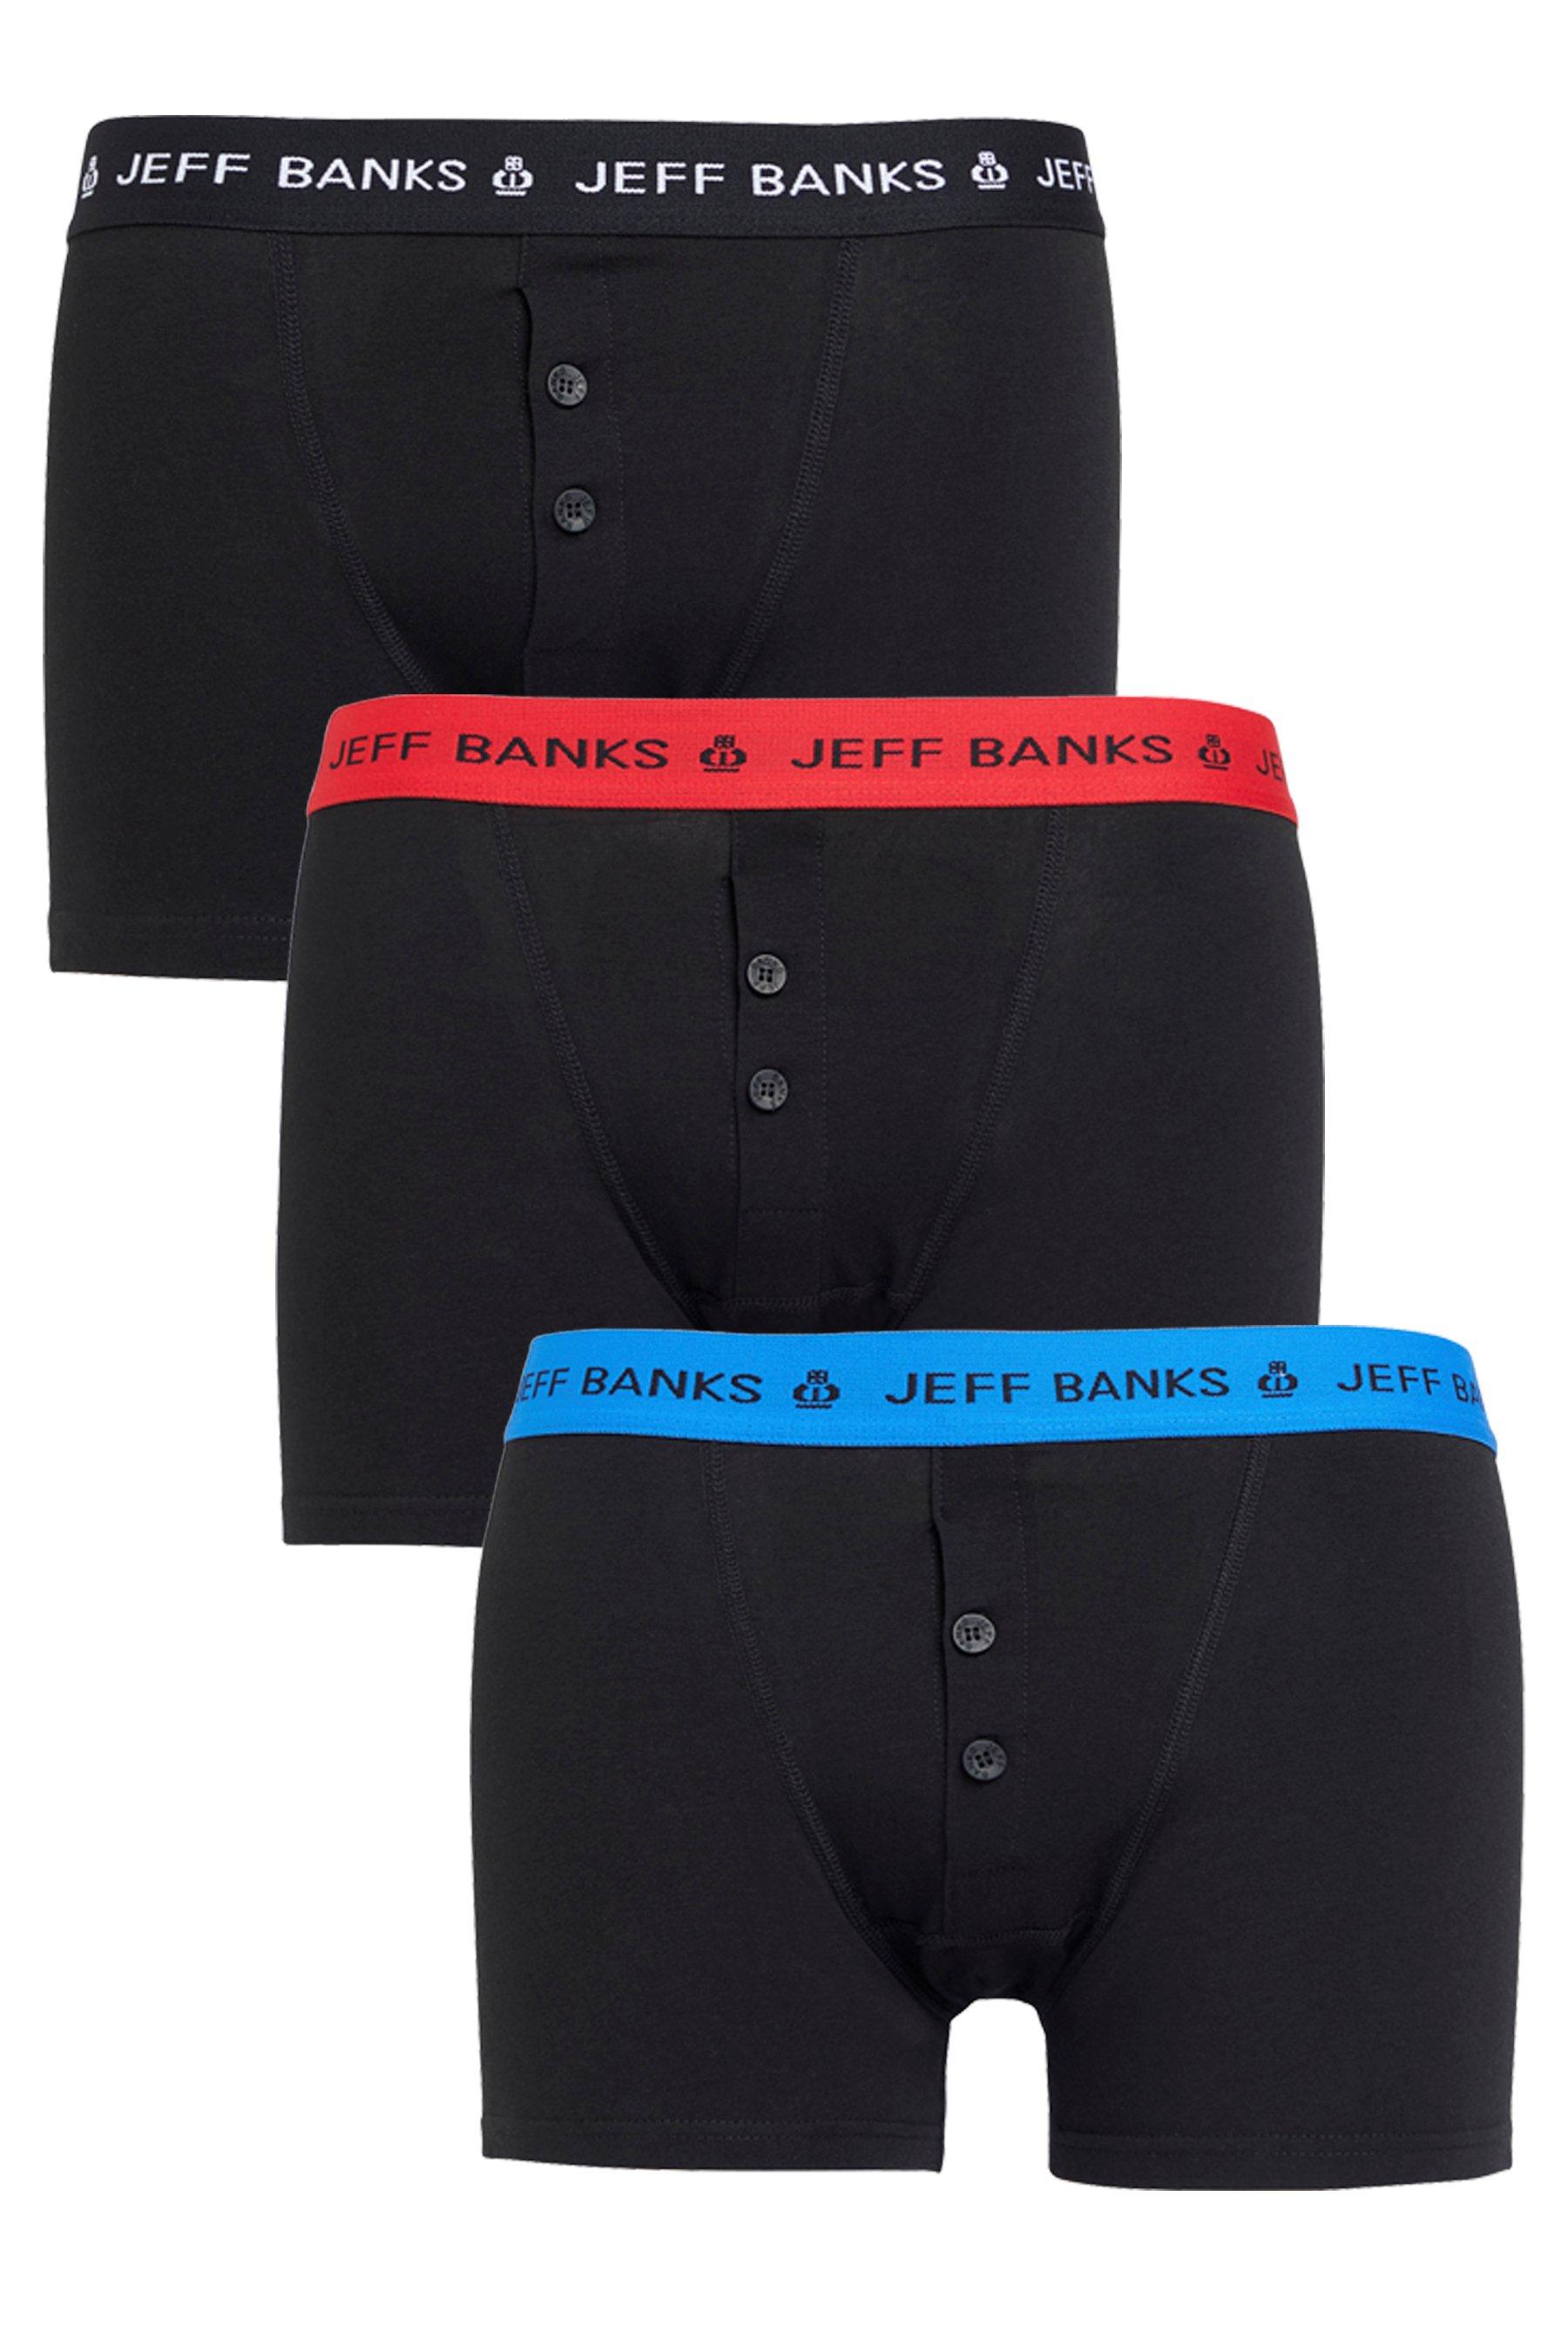 jeff banks pack of 3 black colourband loose fit boxers - mens - size: small